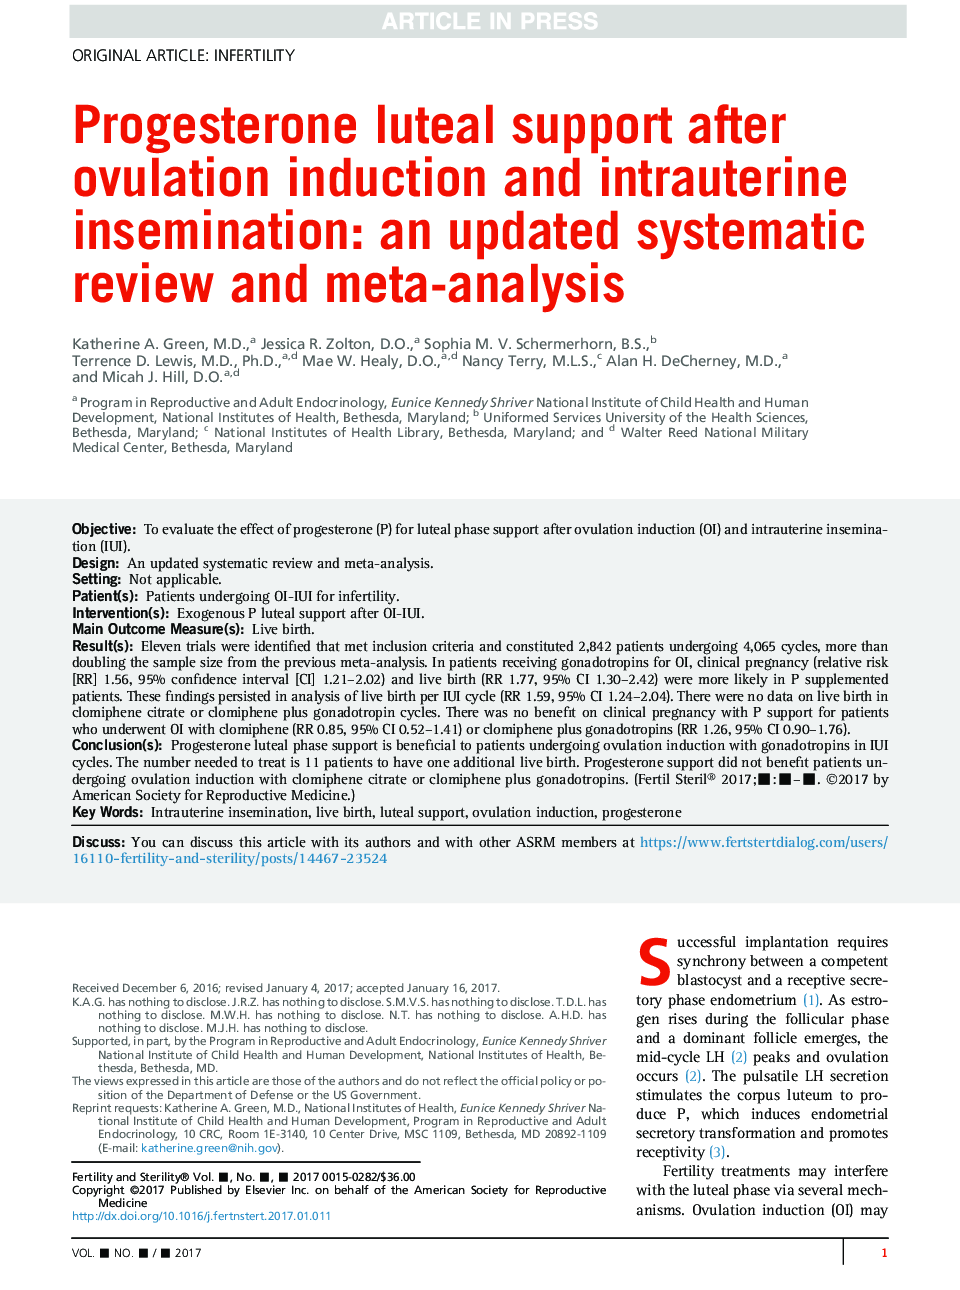 Progesterone luteal support after ovulation induction and intrauterine insemination: an updated systematic review and meta-analysis